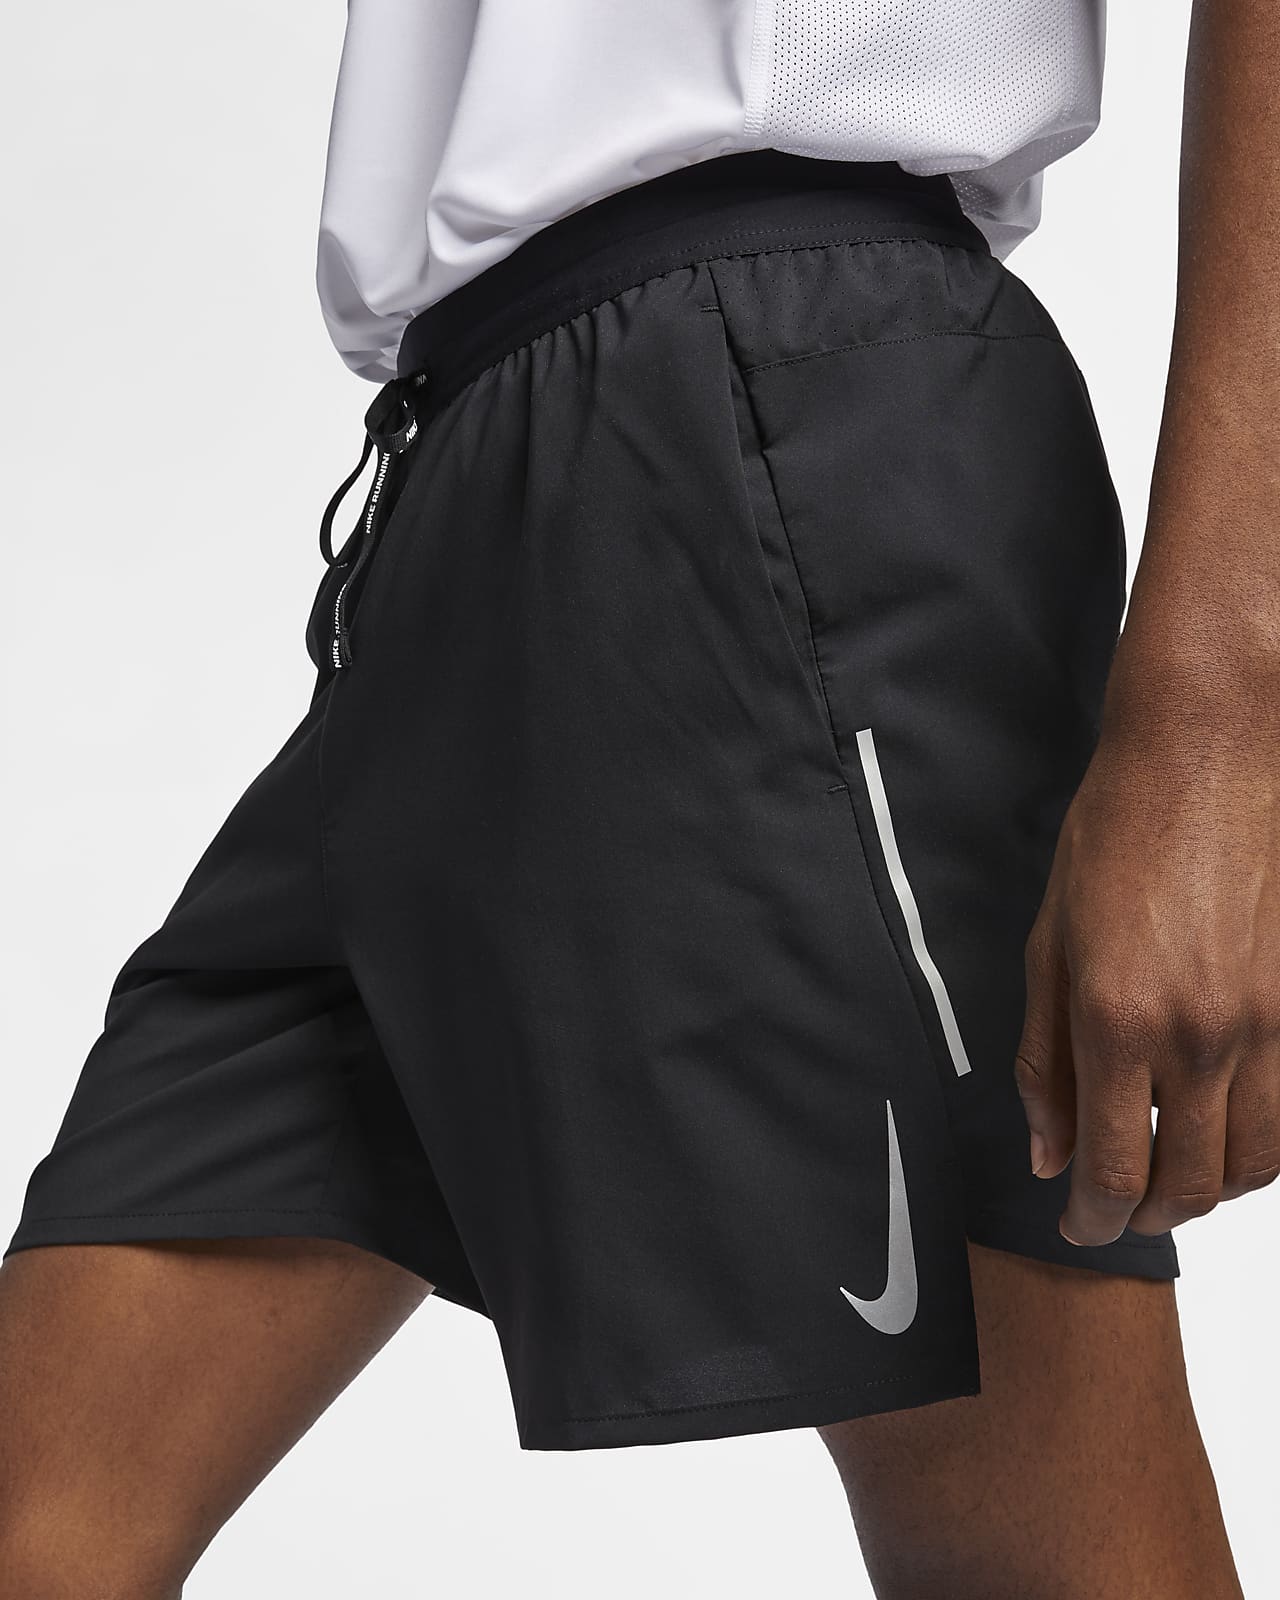 nike running shorts with zipper in back